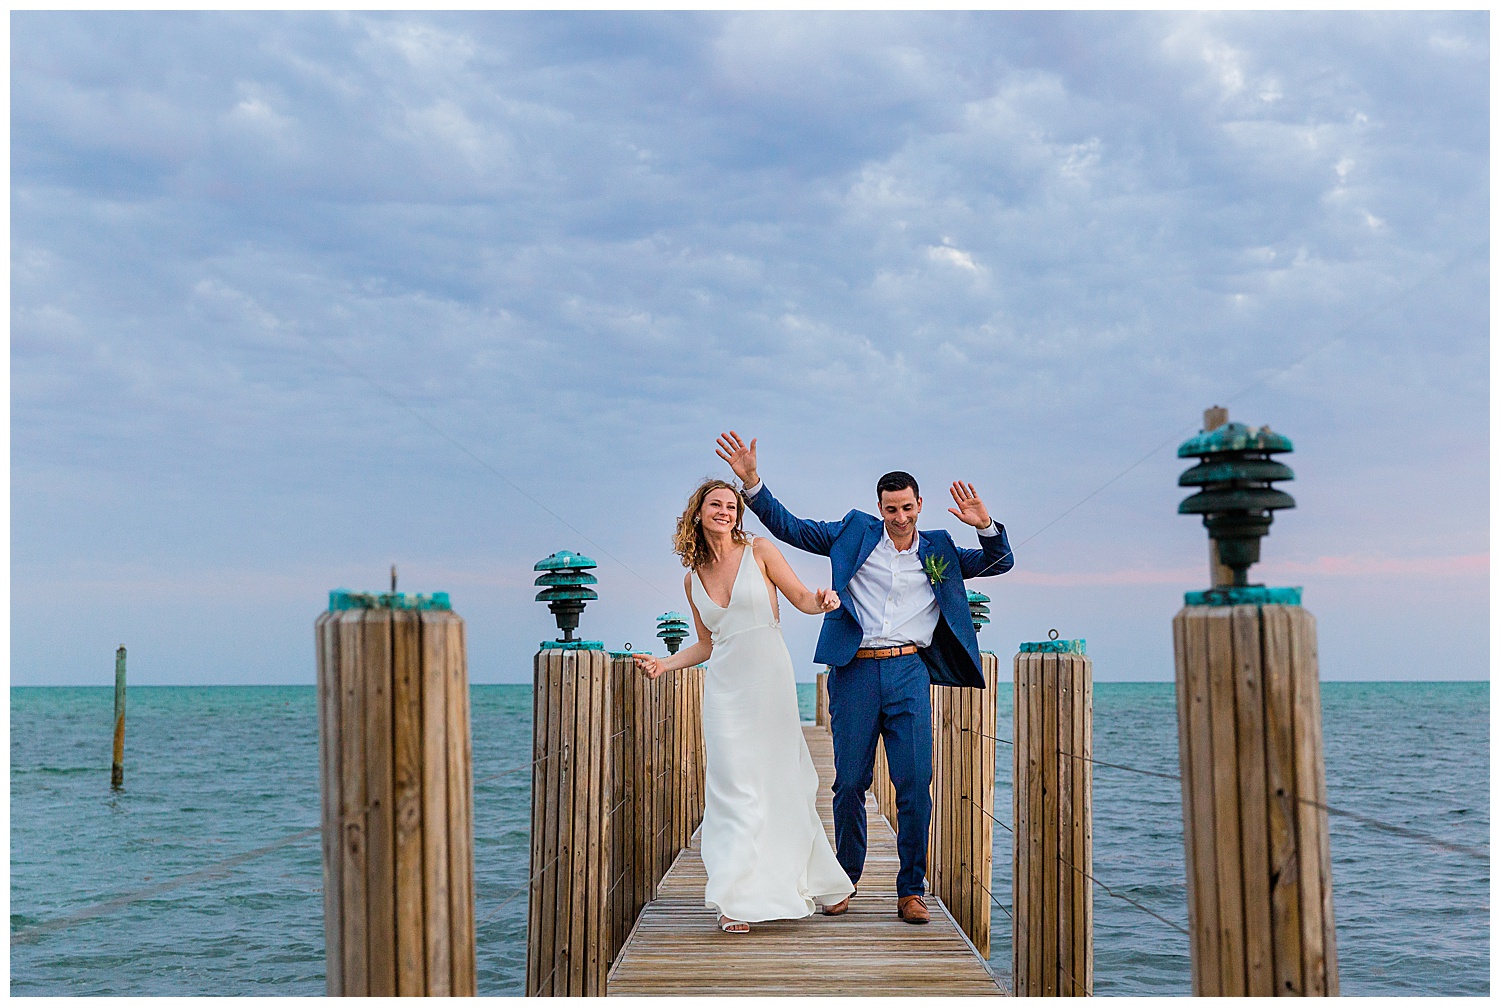 bride and groom dance on a dock on a blue ocean